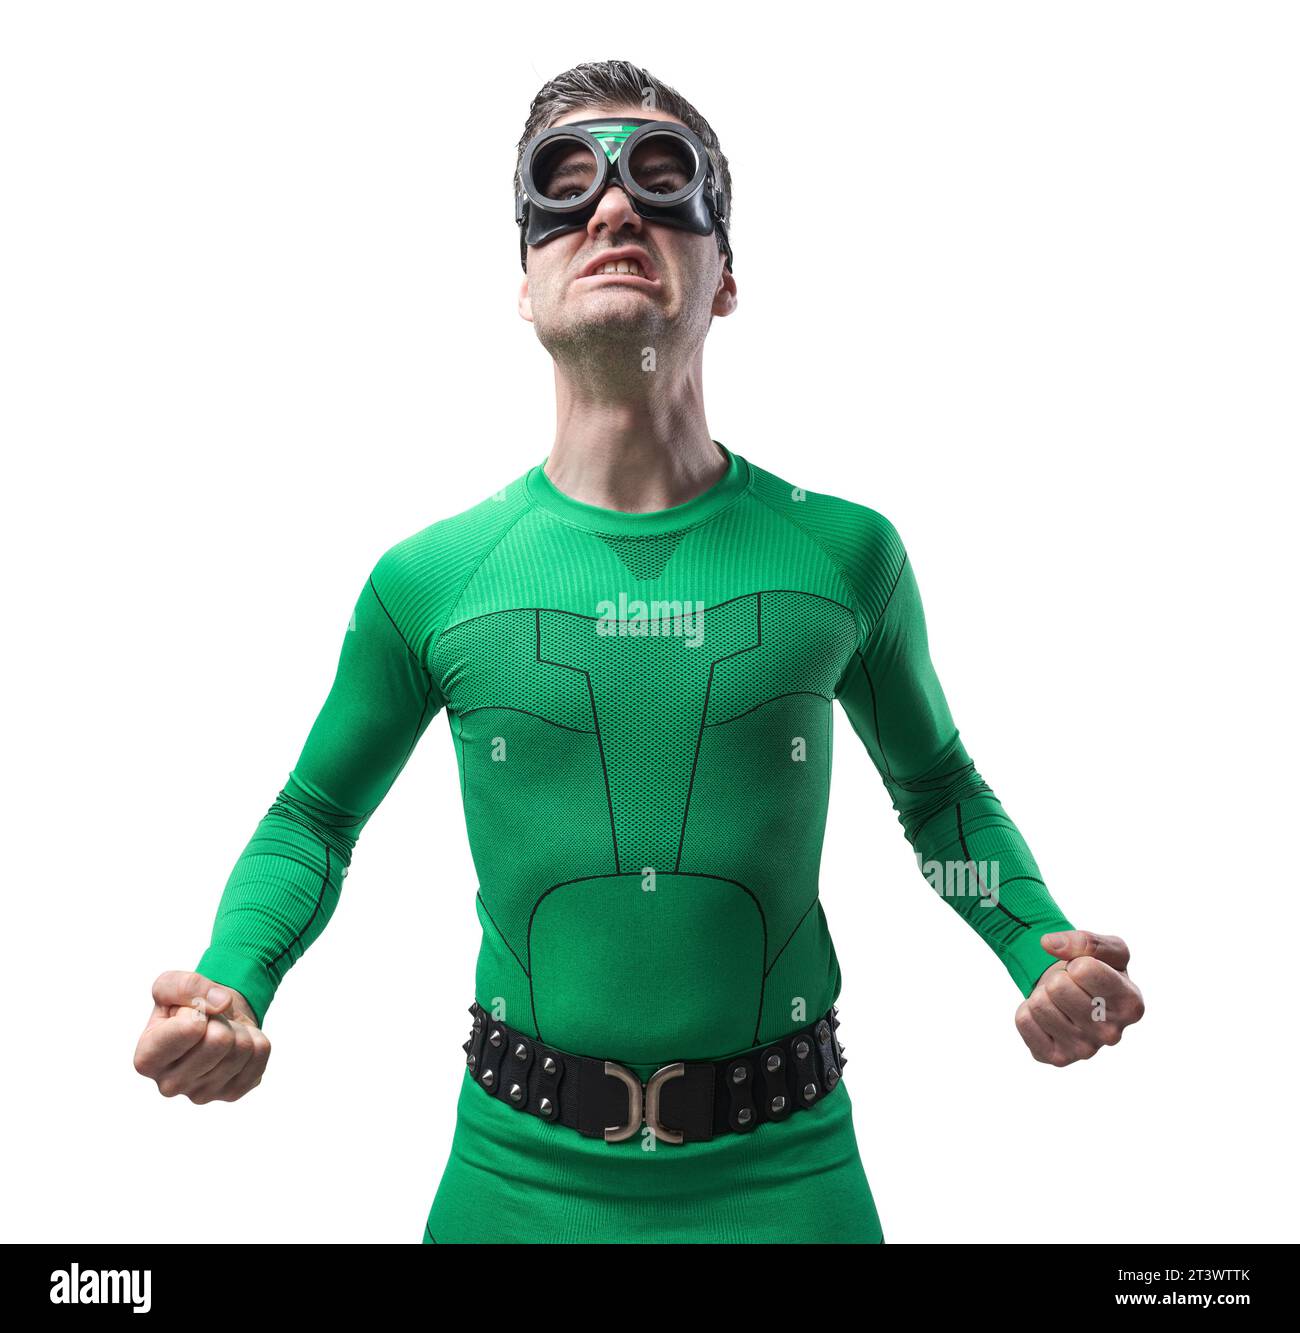 Funny green superhero snarling and ready to punch. Stock Photo